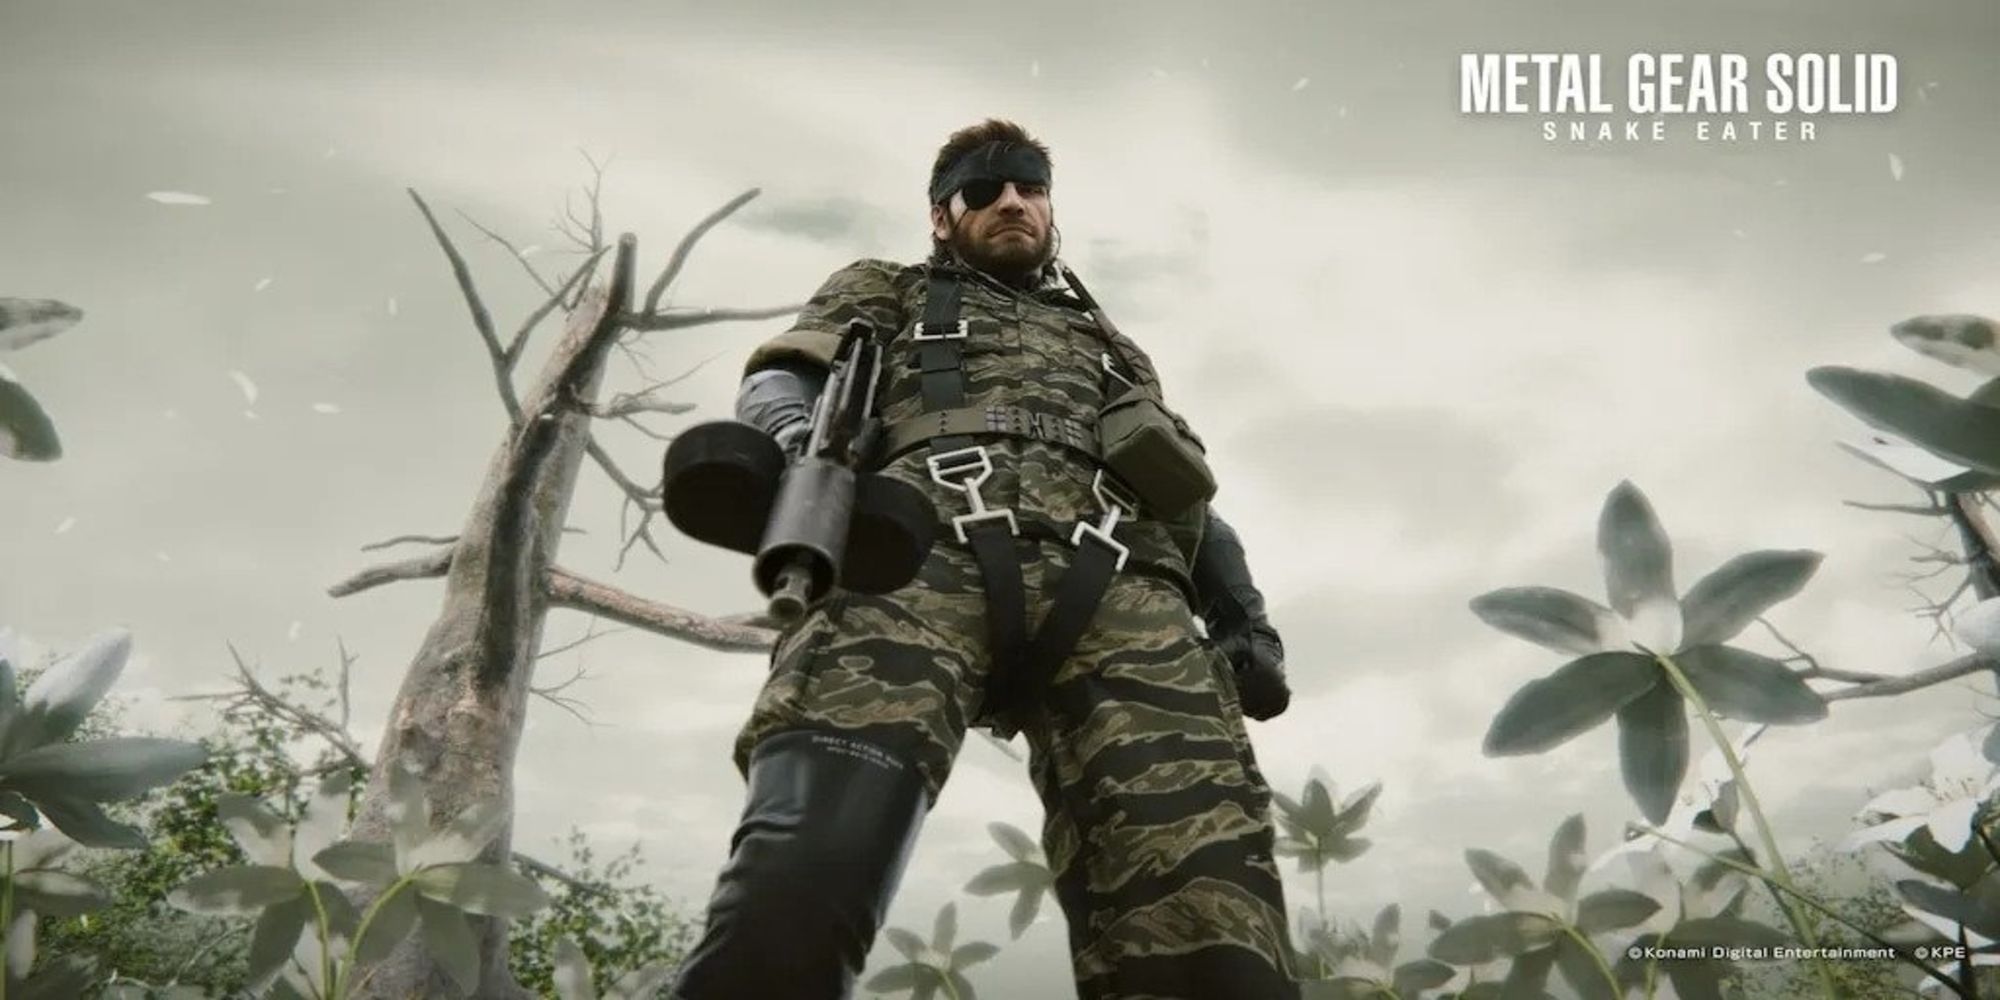 Image Depicting A Promotional Still of Big Boss From Metal Gear Solid 3: Snake Eater